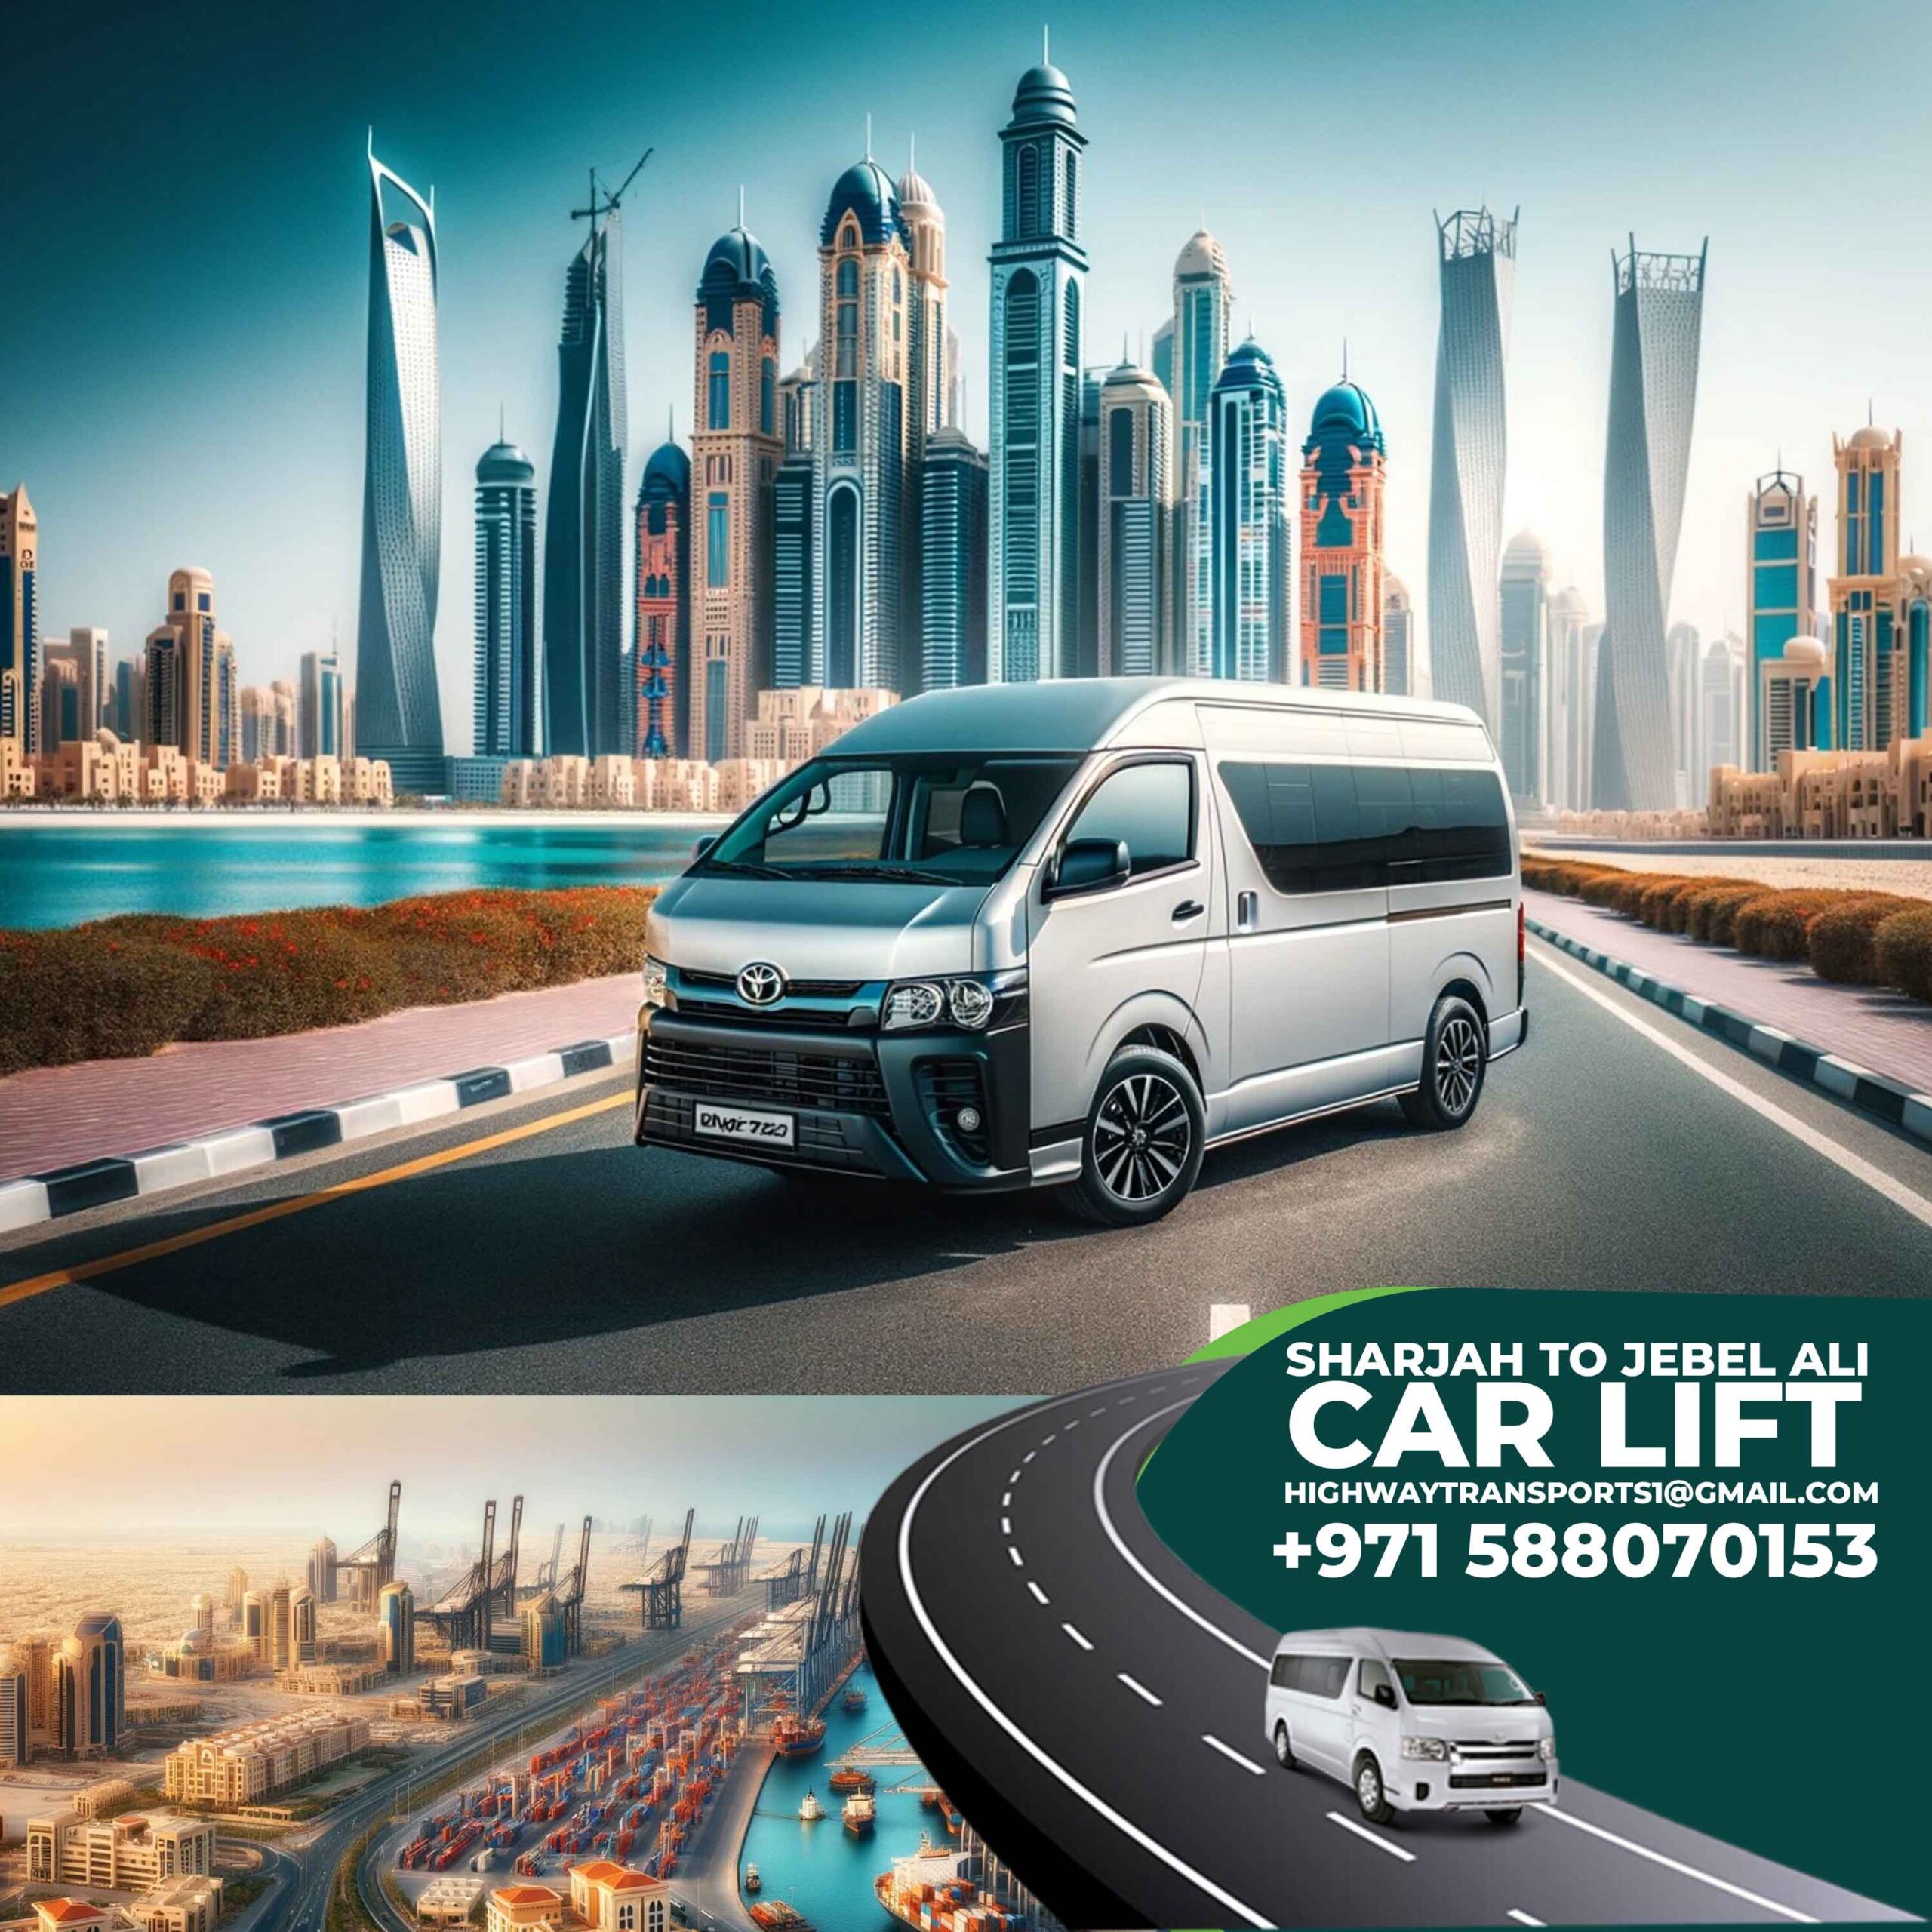 Sharjah to Jebel Ali car lift on Monthly basis